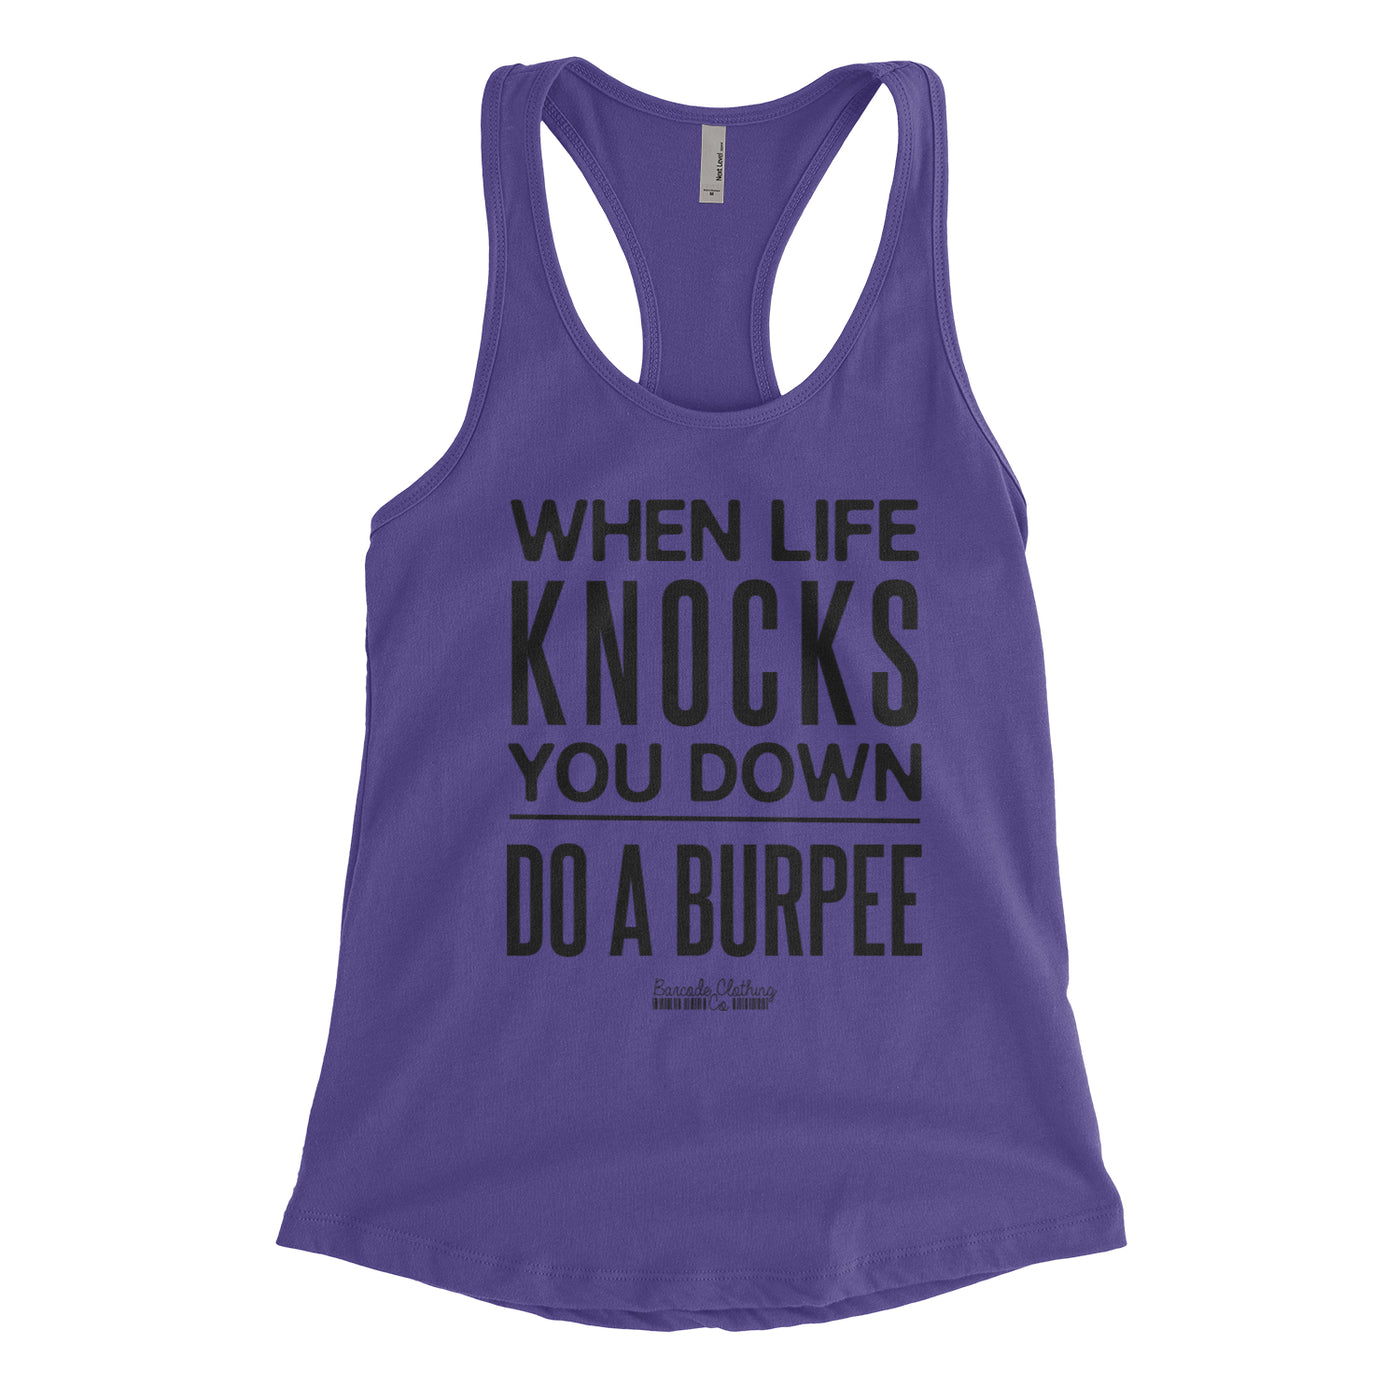 Do A Burpee Blacked Out